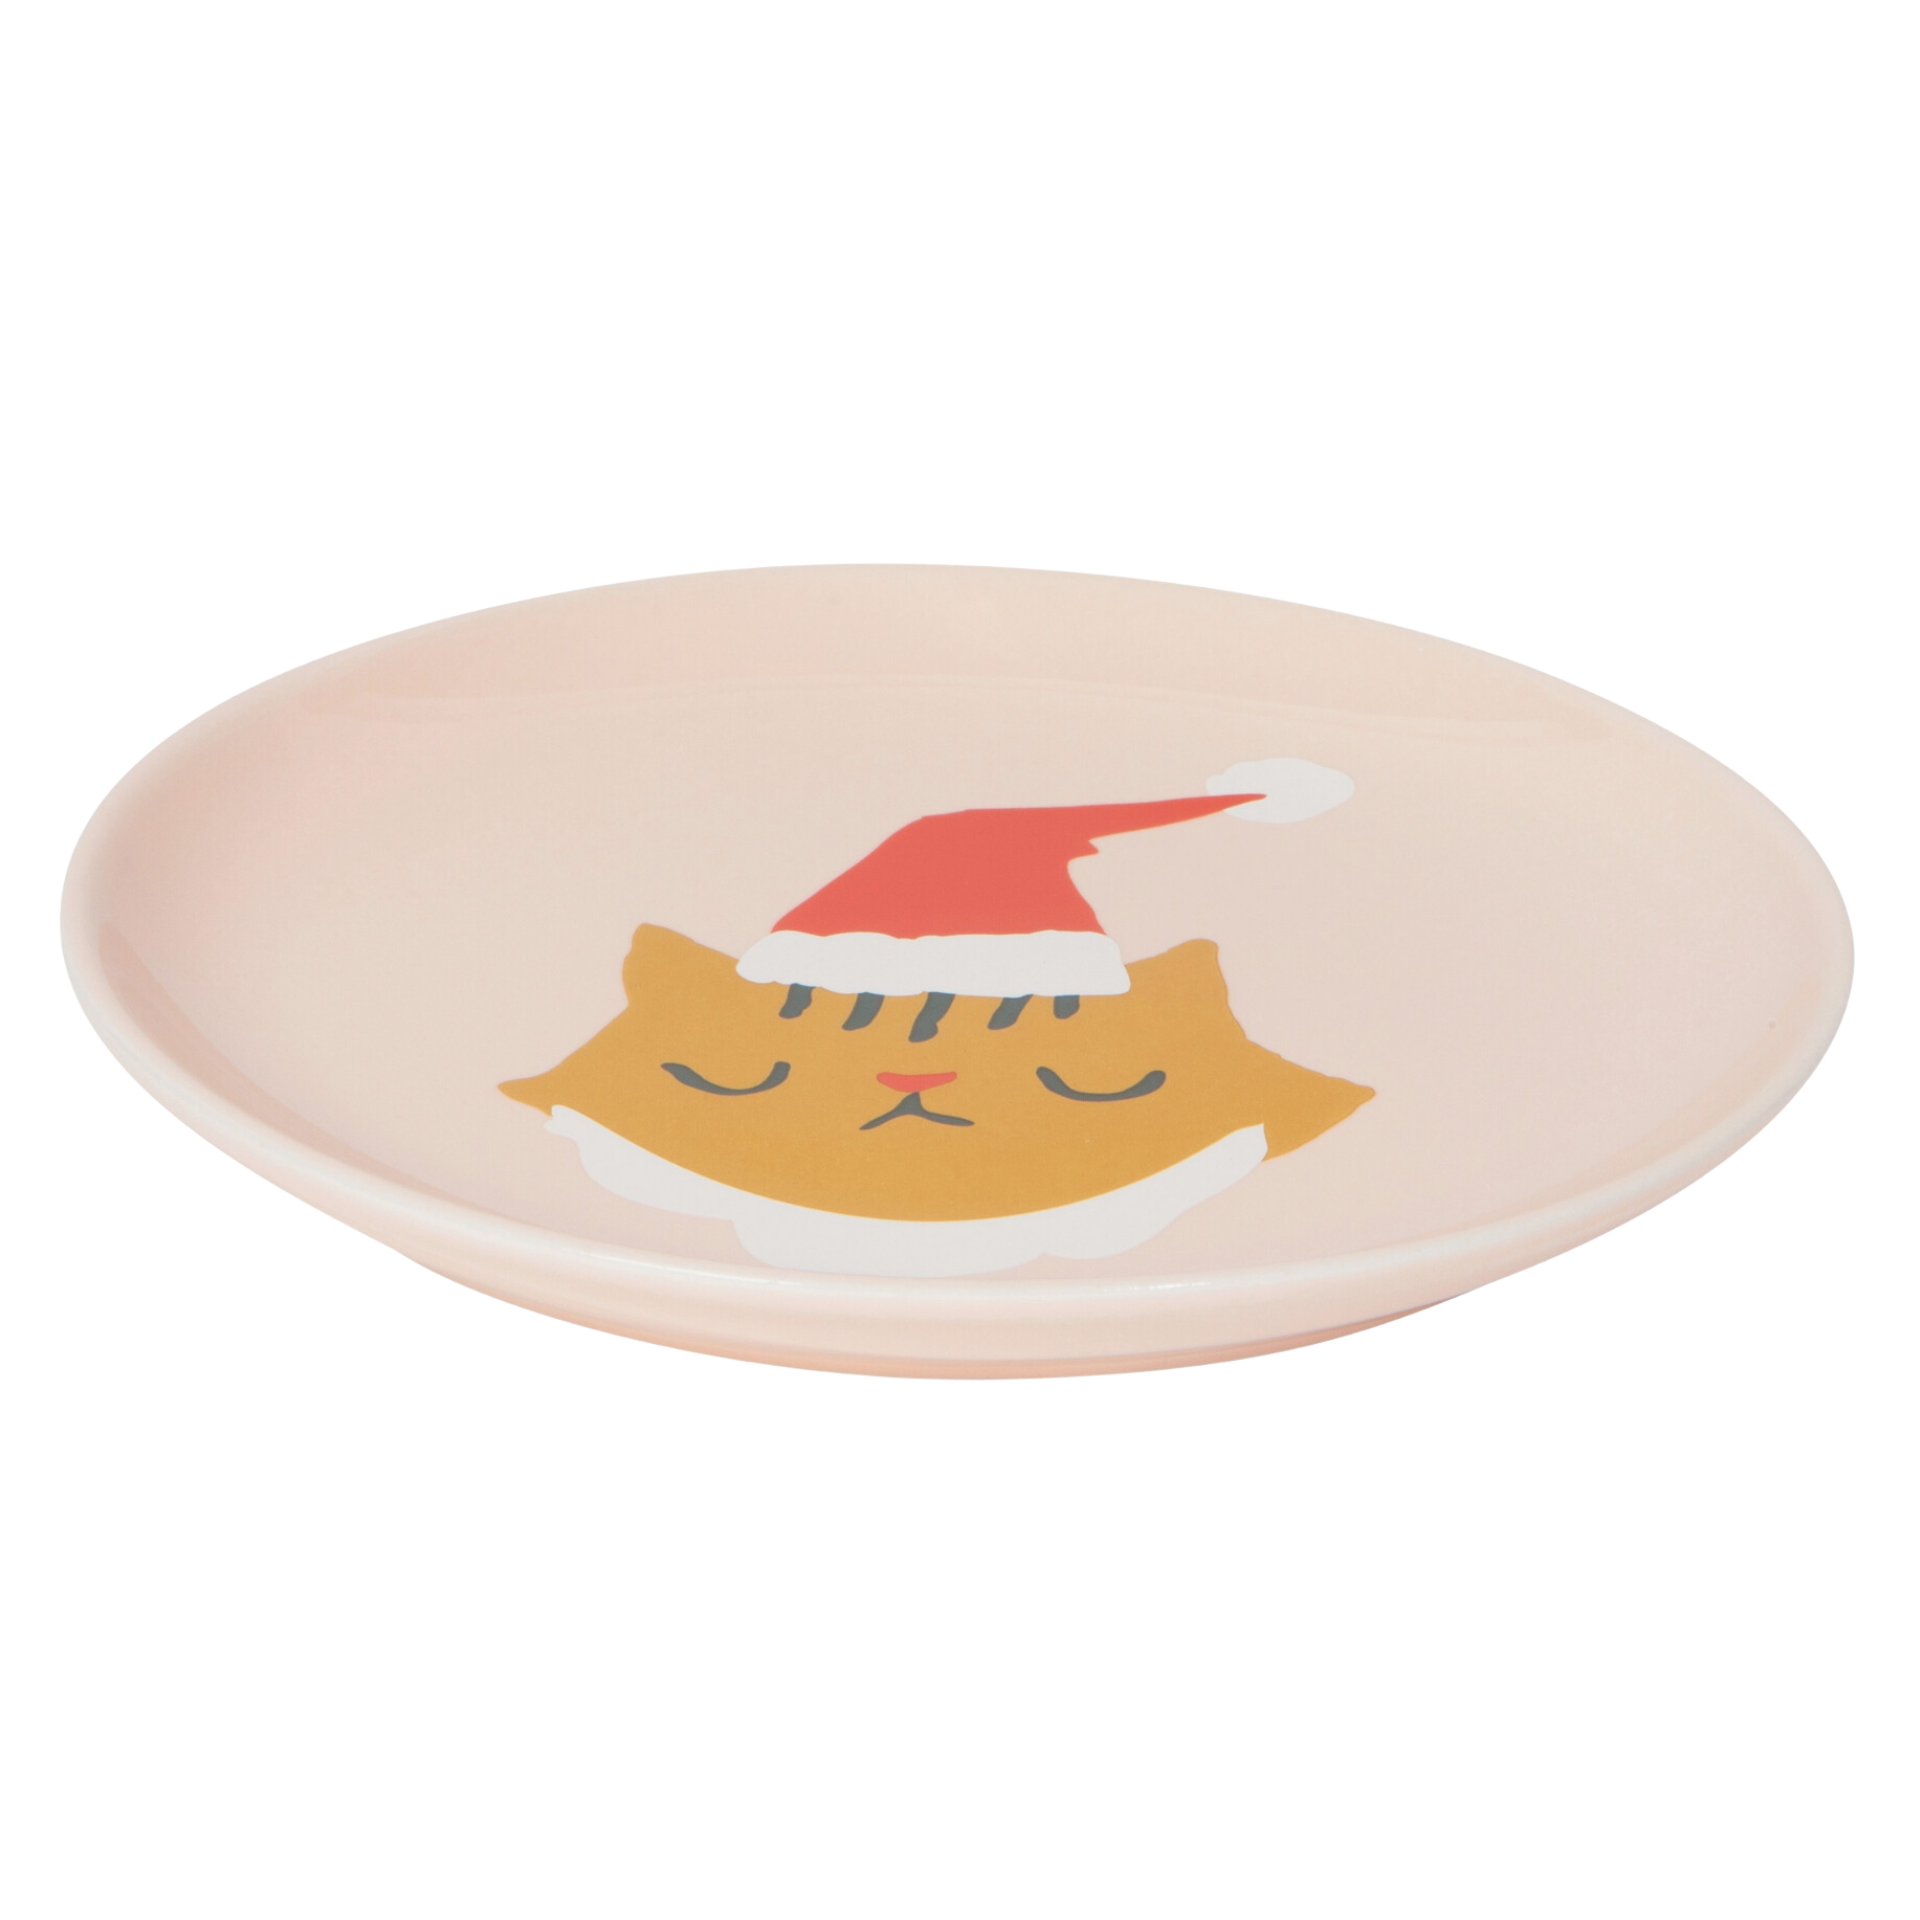 Let It Meow Christmas Appetizer Plate showcasing a mischievous cat with a Santa beard and hat.